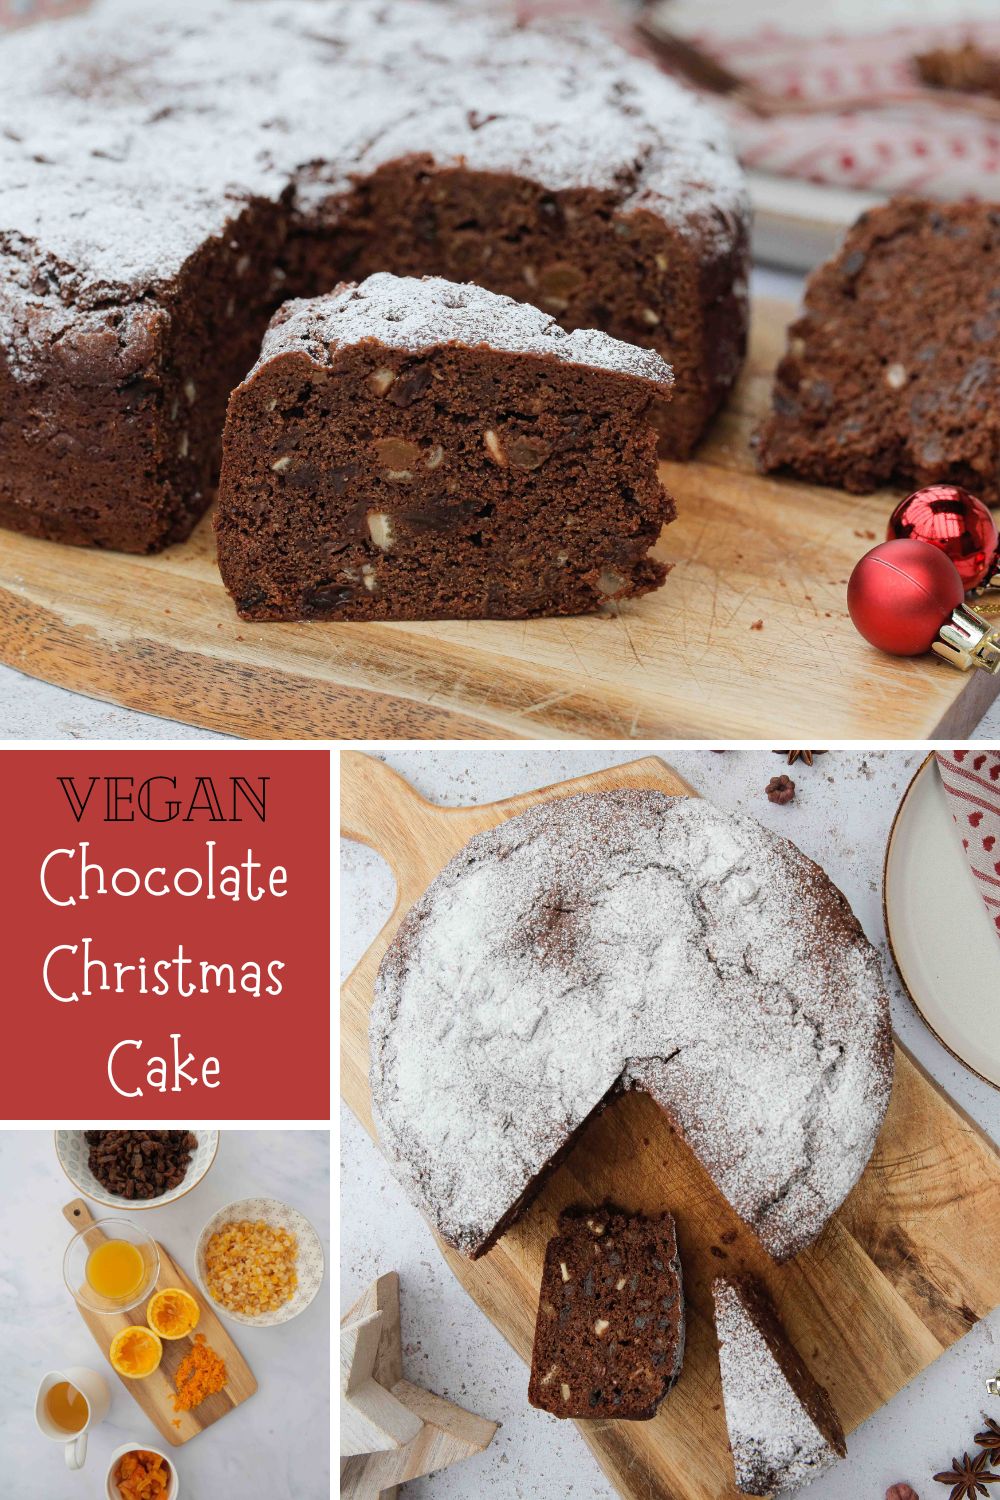 This chocolate Christmas cake is dark, squidgy, delicious and a little bit boozy! Packed with fruit and a hint of orange, the chocolate flavour is subtle but defined and adds a whole new level to a traditional Christmas cake | Recipe on thecookandhim.com #veganchristmascake #vegancake #christmascake #chocolatechristmascake #christmascake #traditionalchristmascakerecipe #veganchristmas